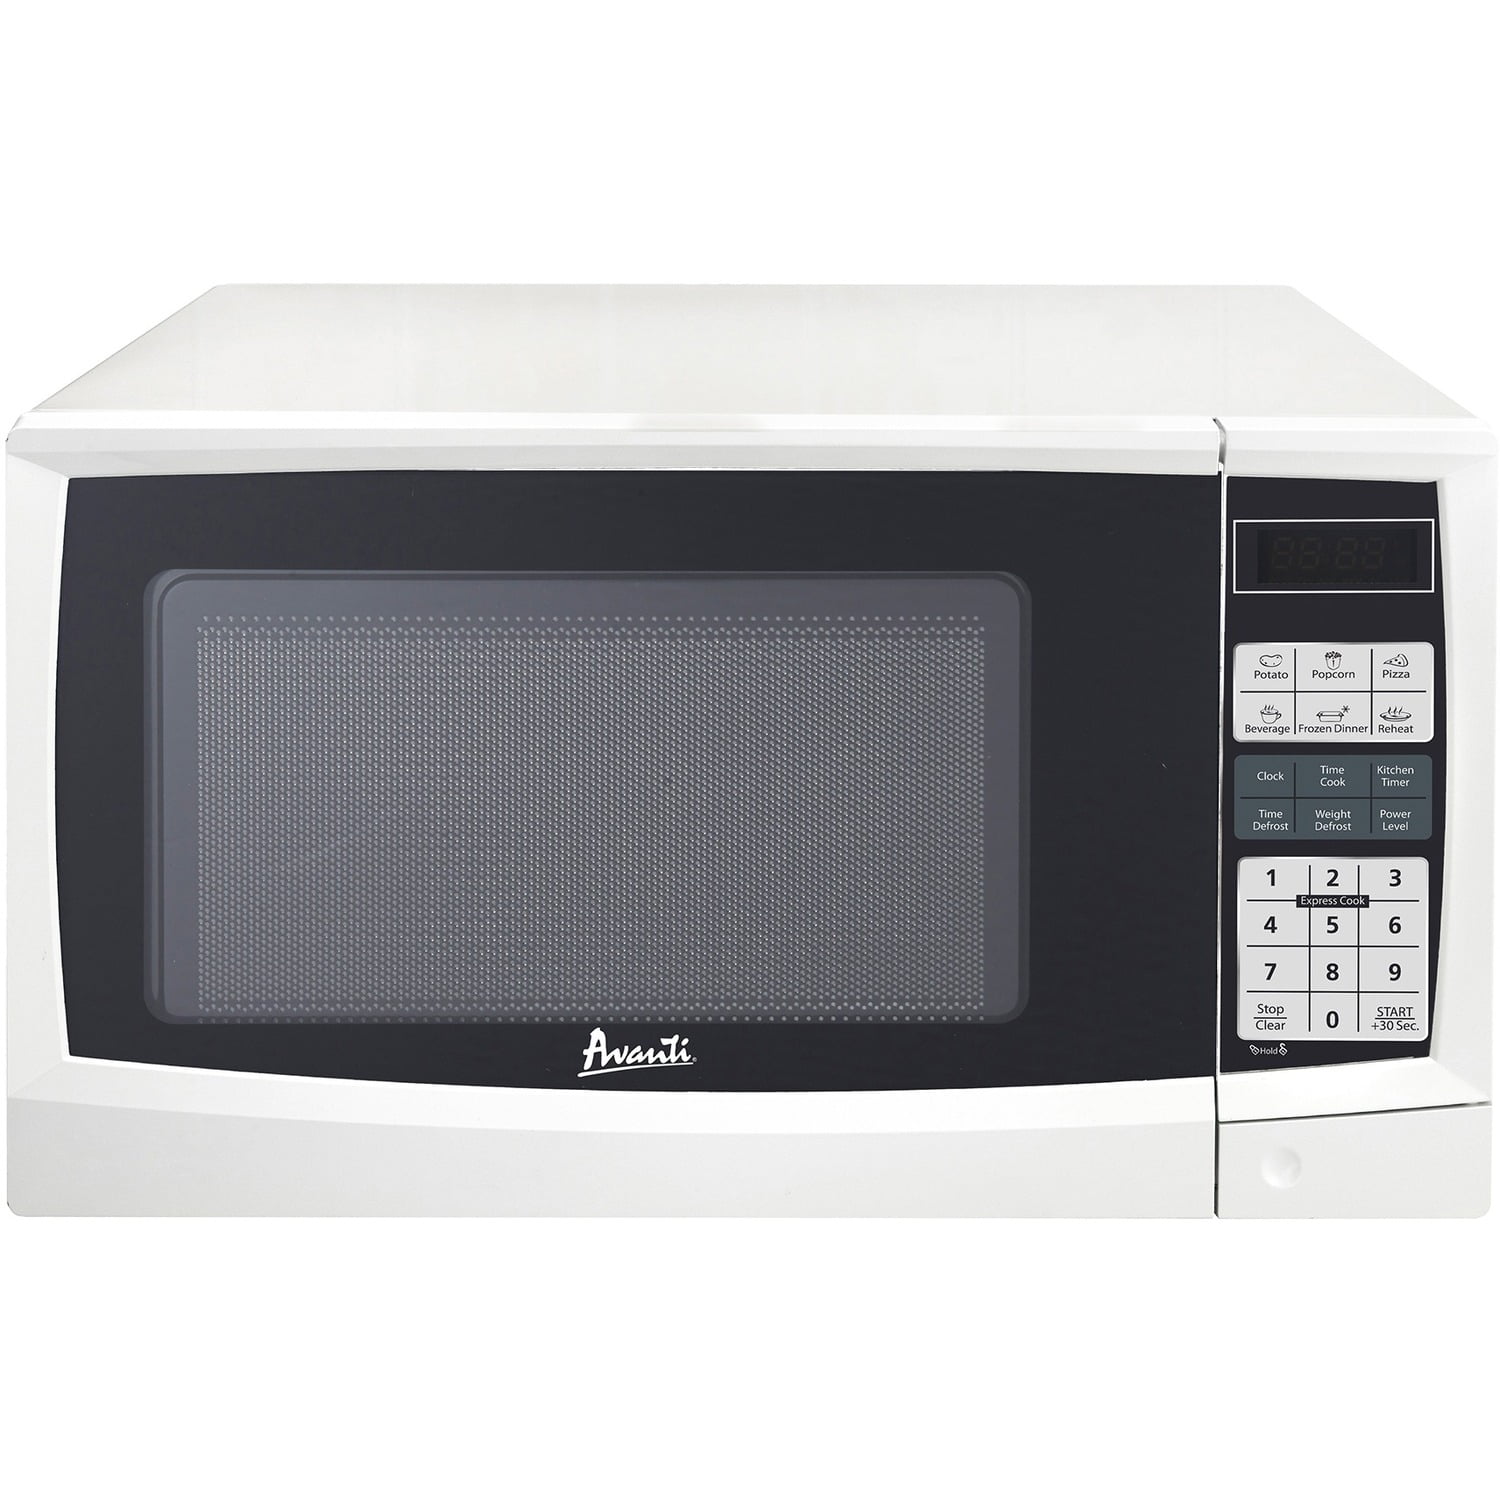 MO7191TW in White by Avanti in Bangor, ME - 0.7 cu. ft. Microwave Oven